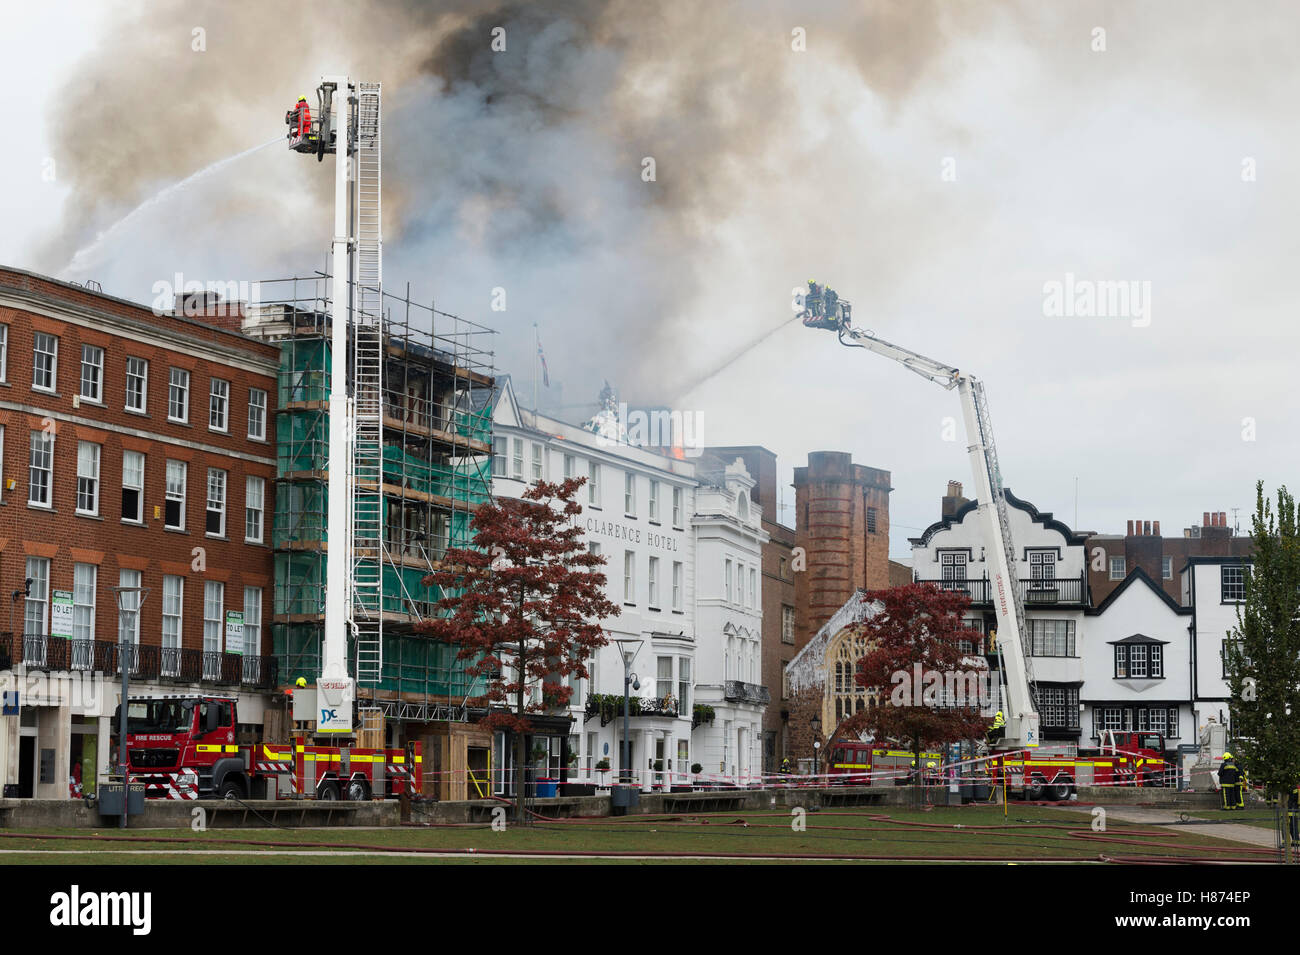 The Royal Clarence Hotel catches fire following an earlier fire in the adjacent art gallery on Cathedral Green, Exeter, UK. Stock Photo